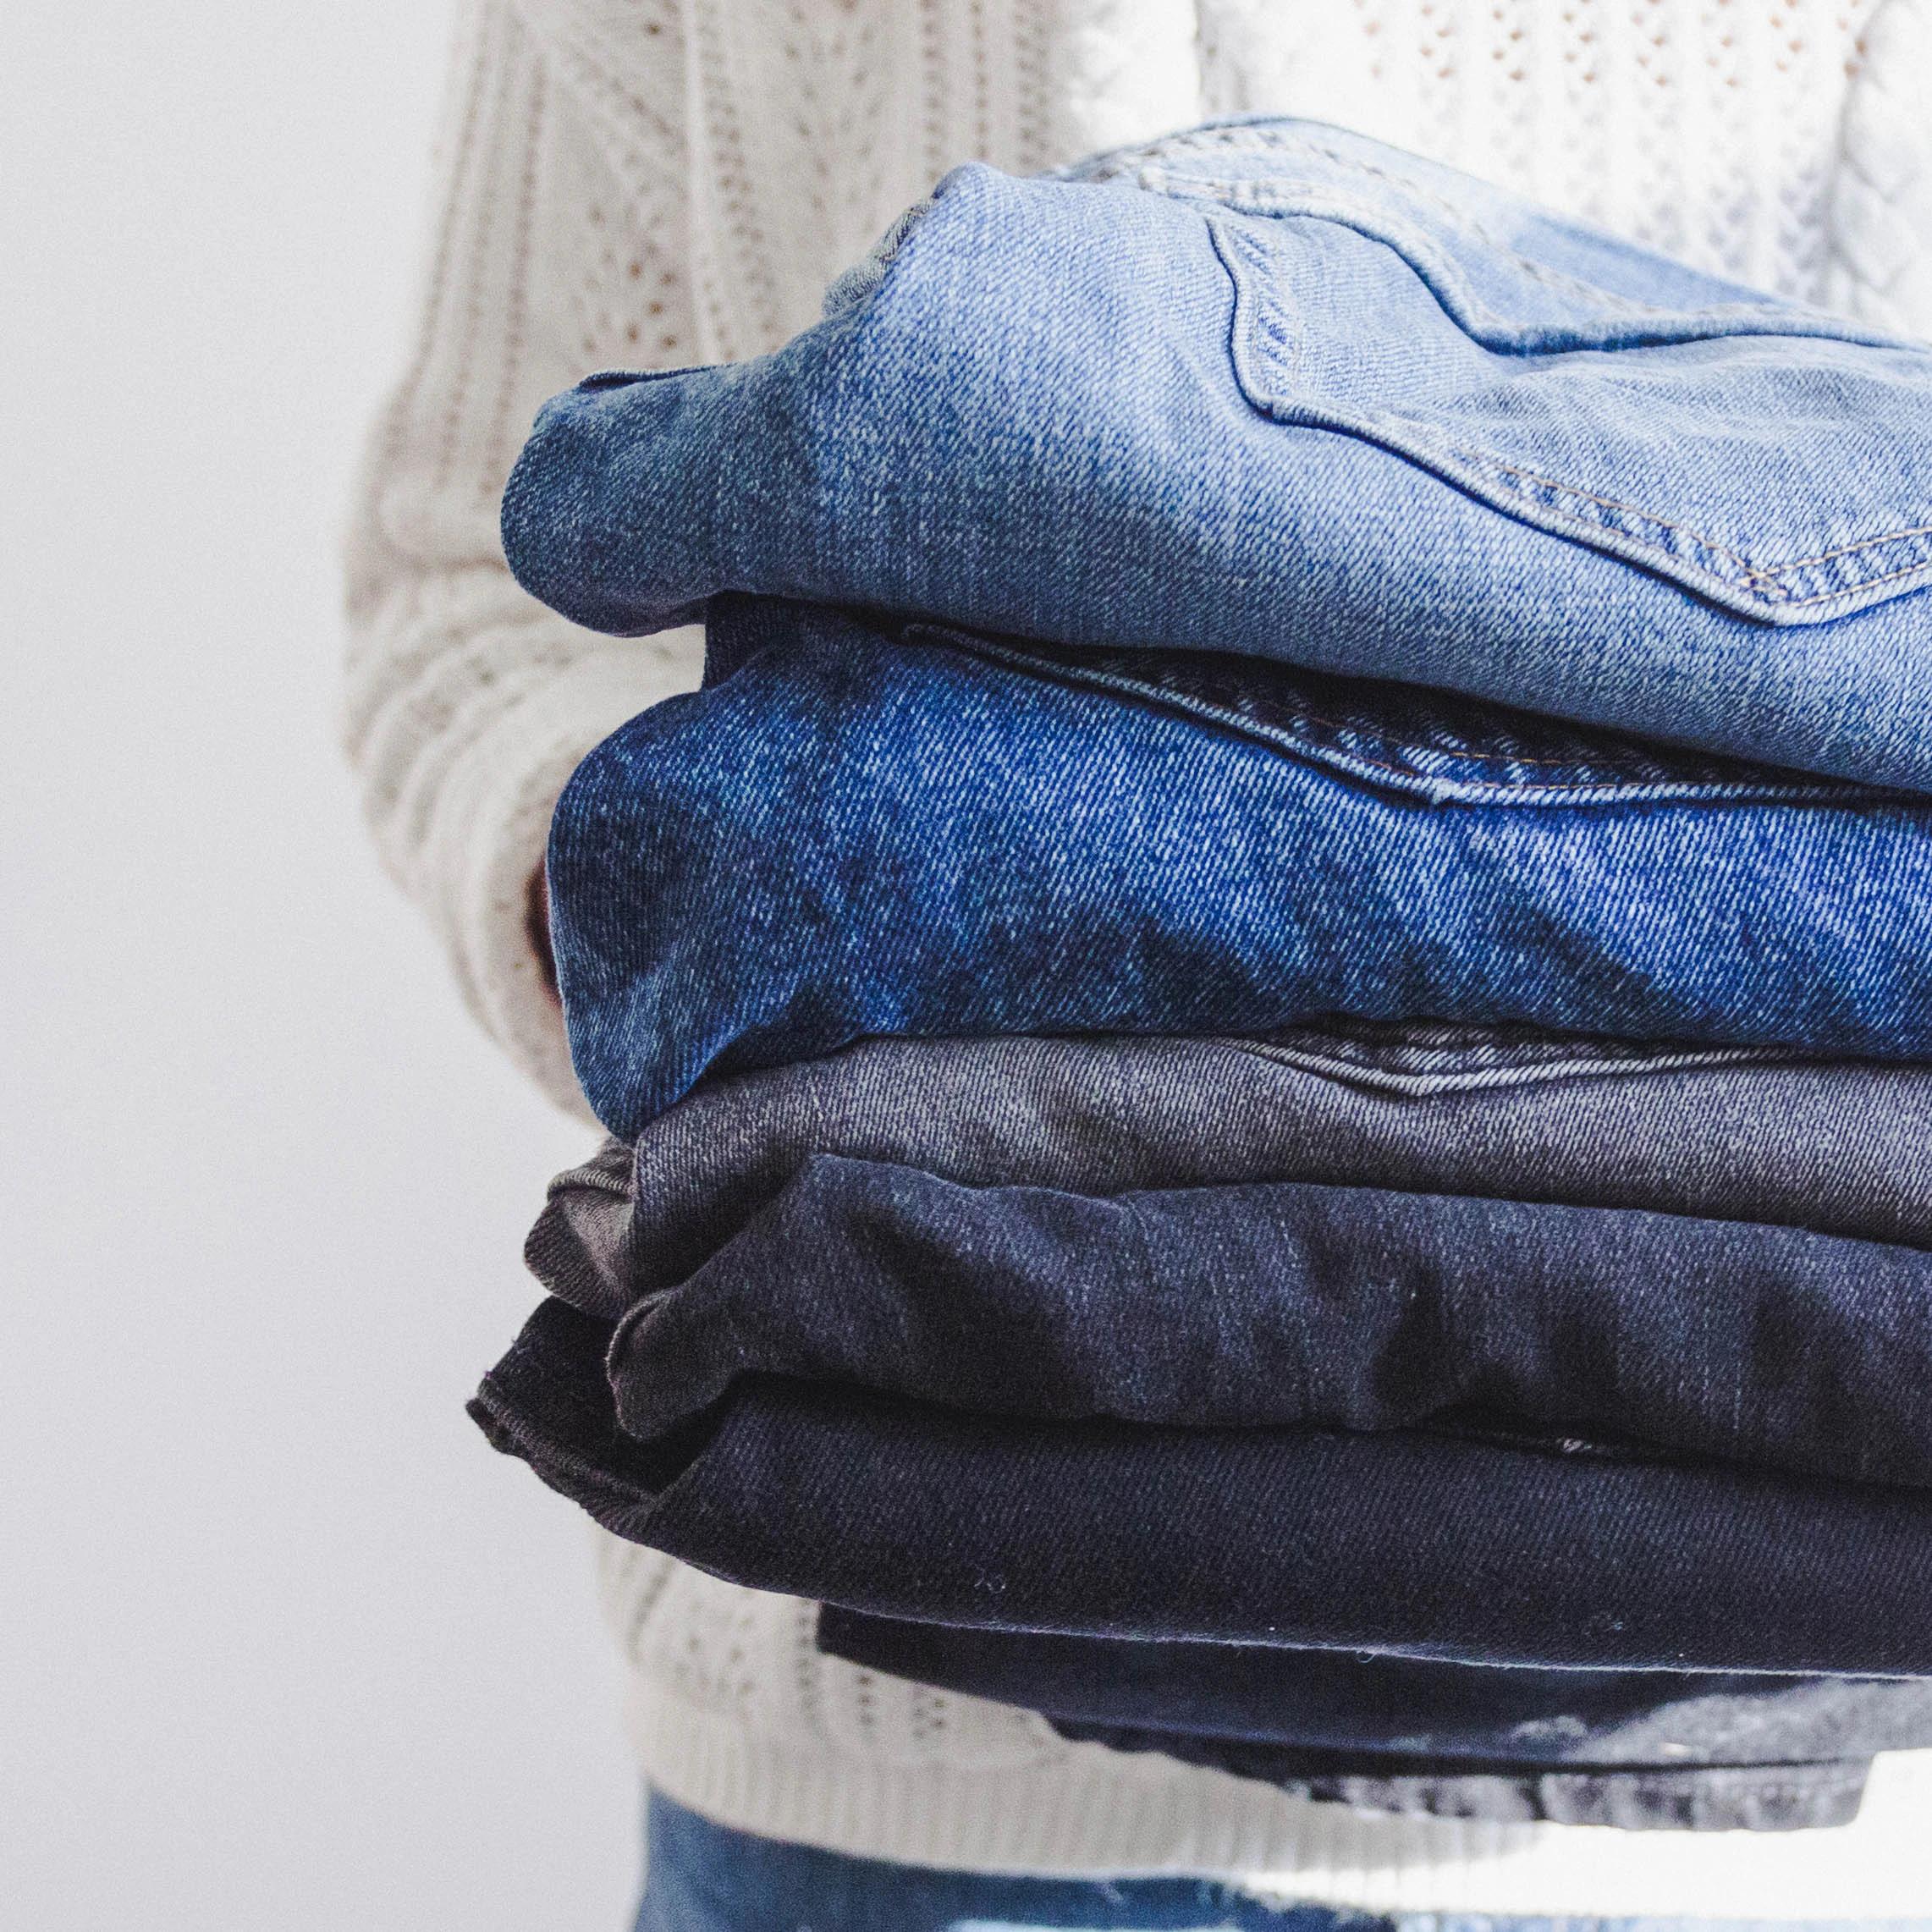 Stack of jeans of different colors